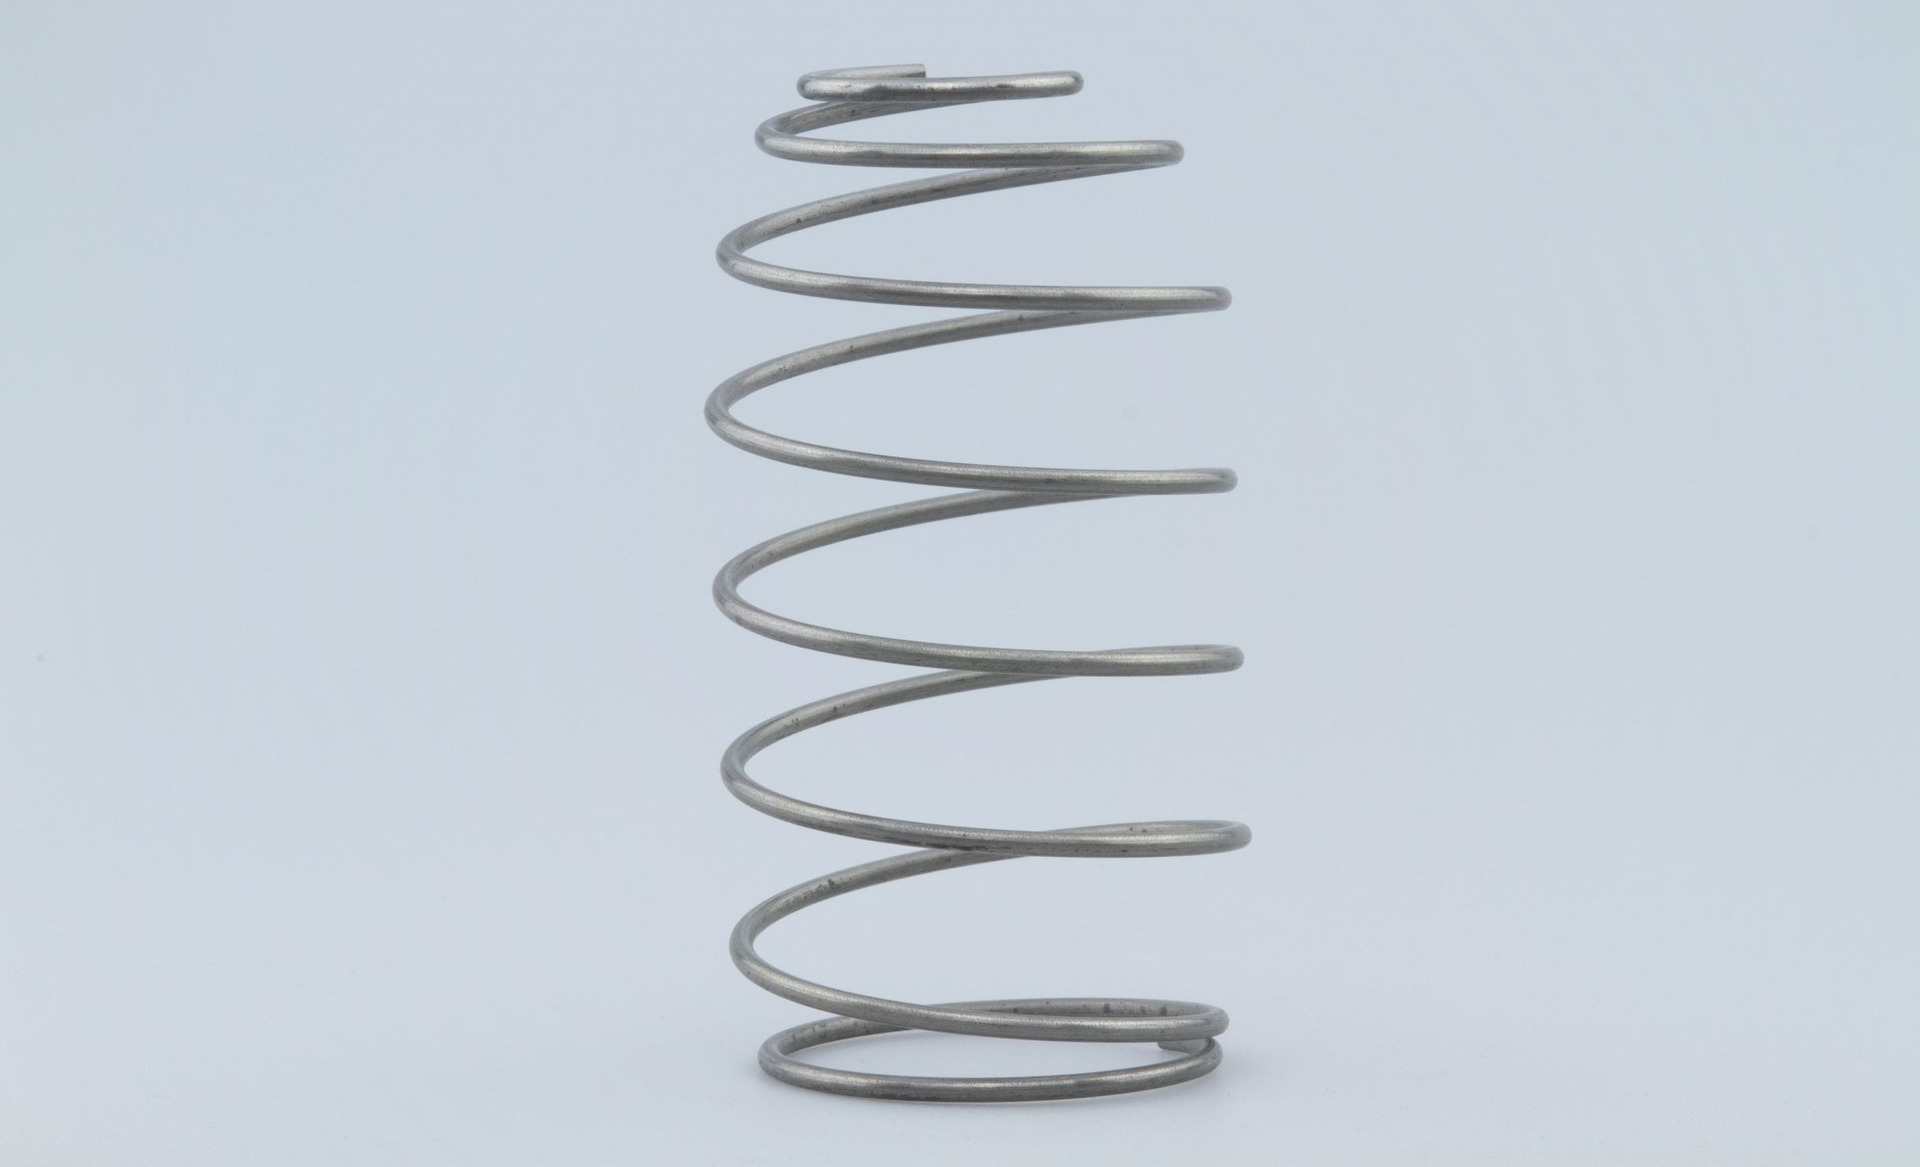 Flat Torsion Spring / Spiral Springs Industrial Spiral Springs Manufacturer From Howrah : The spring store provides you with our torsional springs catalog.